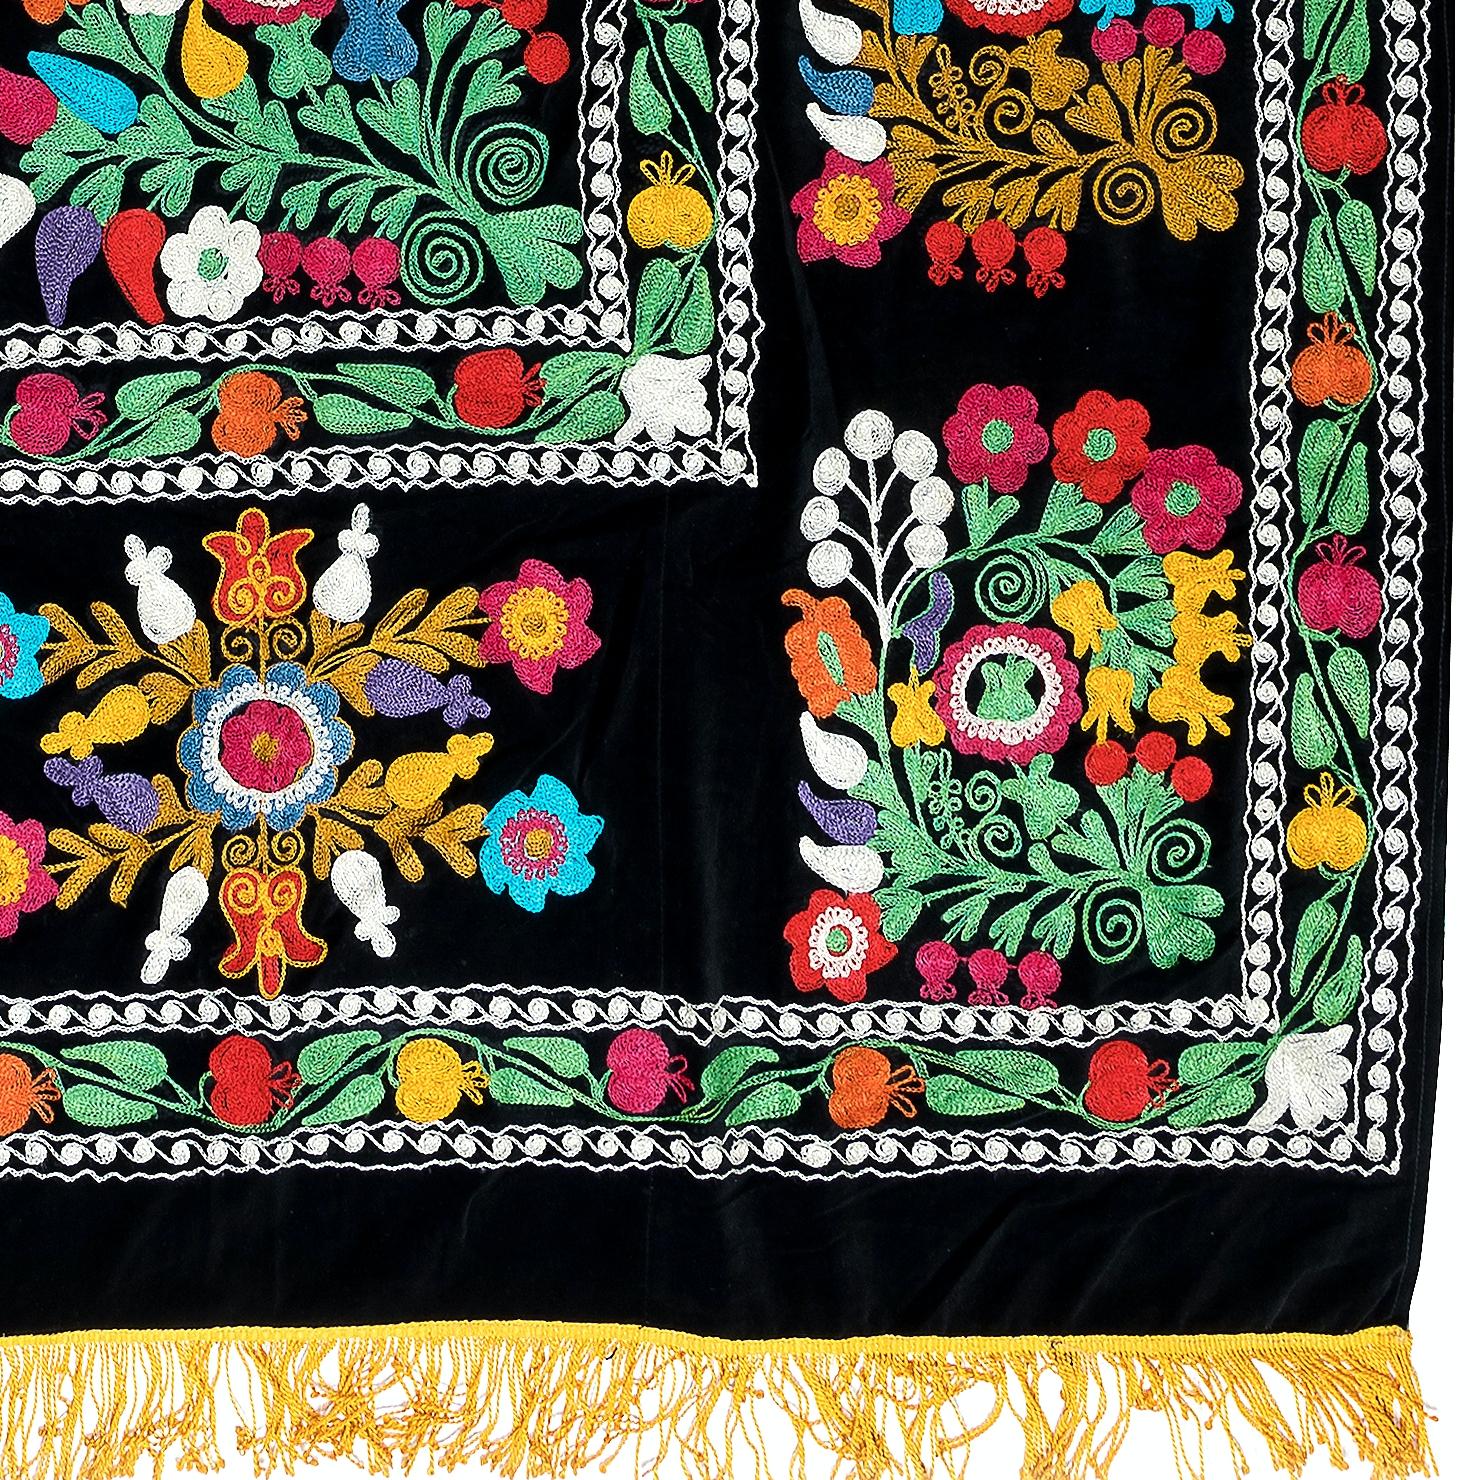 Uzbek 4.2x7.5 Ft Vintage Wall Hanging, Silk Embroidery Wall Hanging, Black Tablecloth For Sale